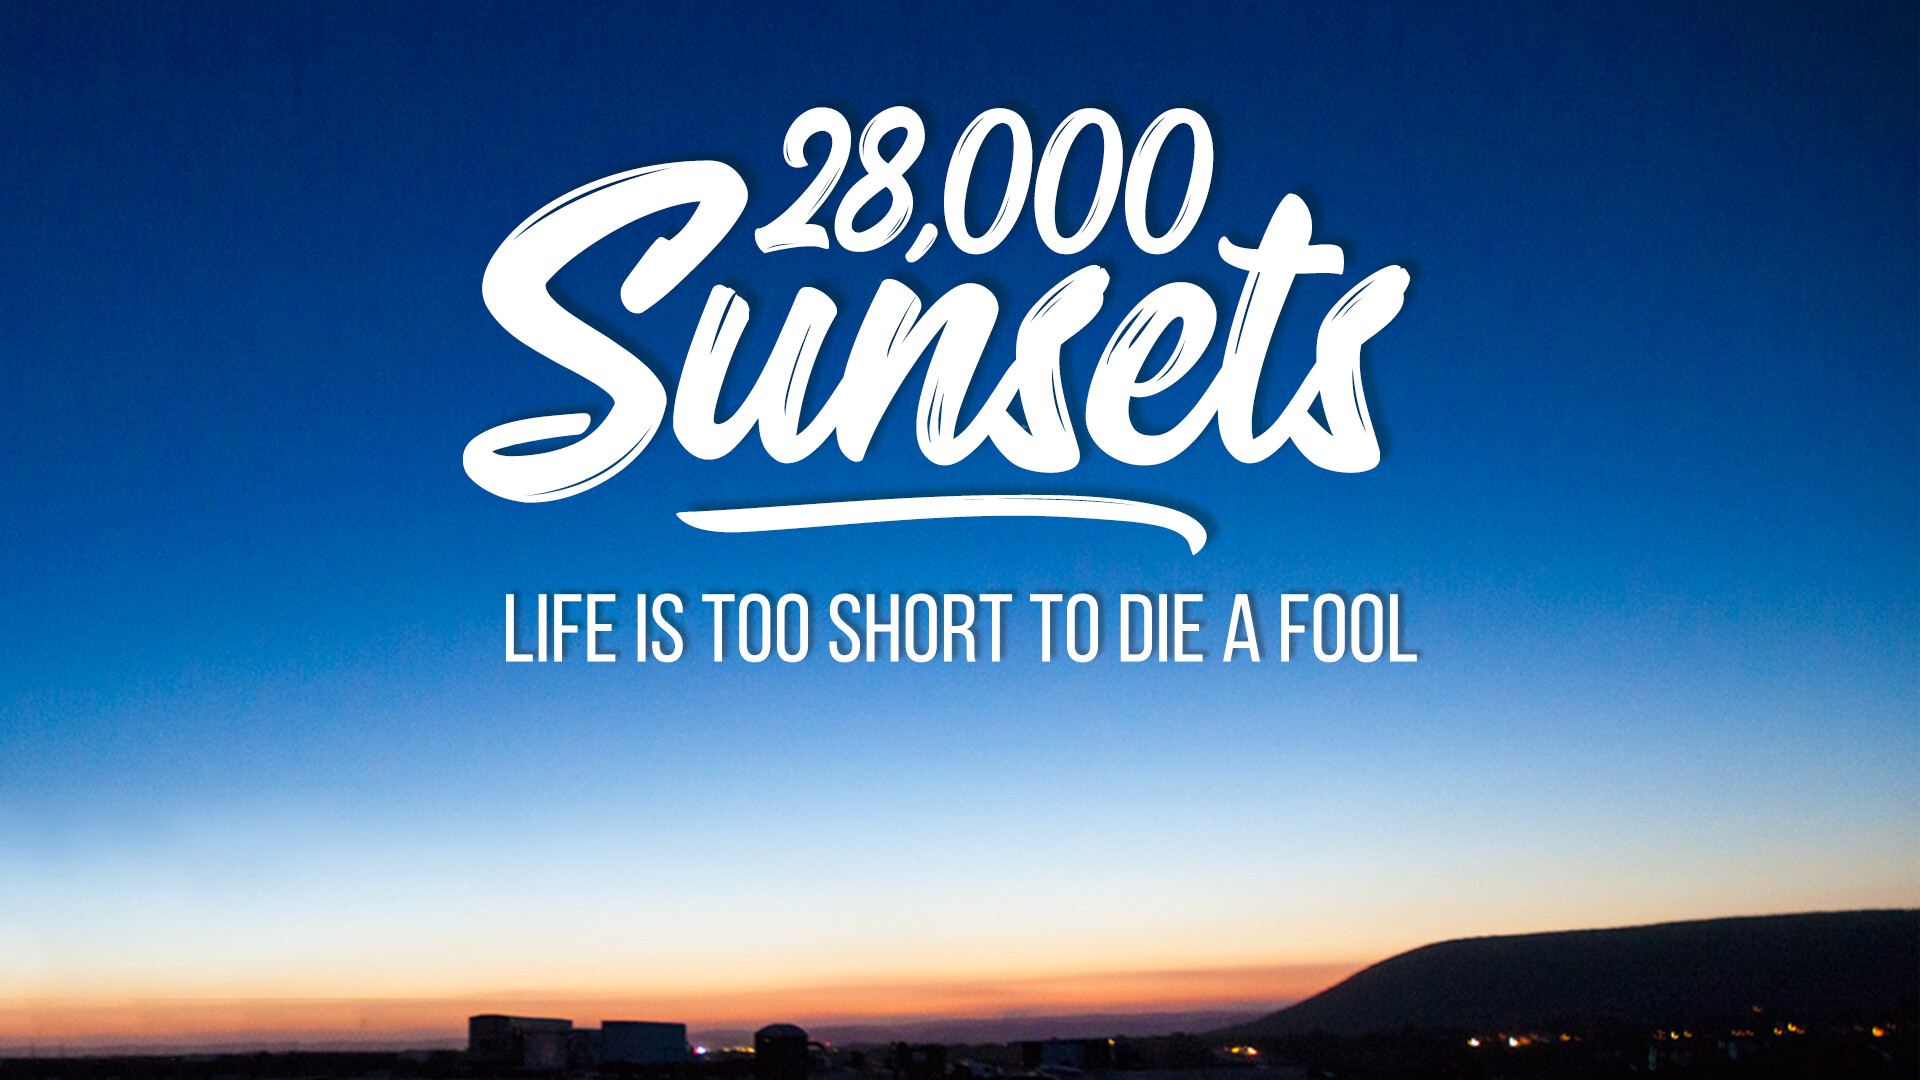 Life's Too Short to Die a Fool